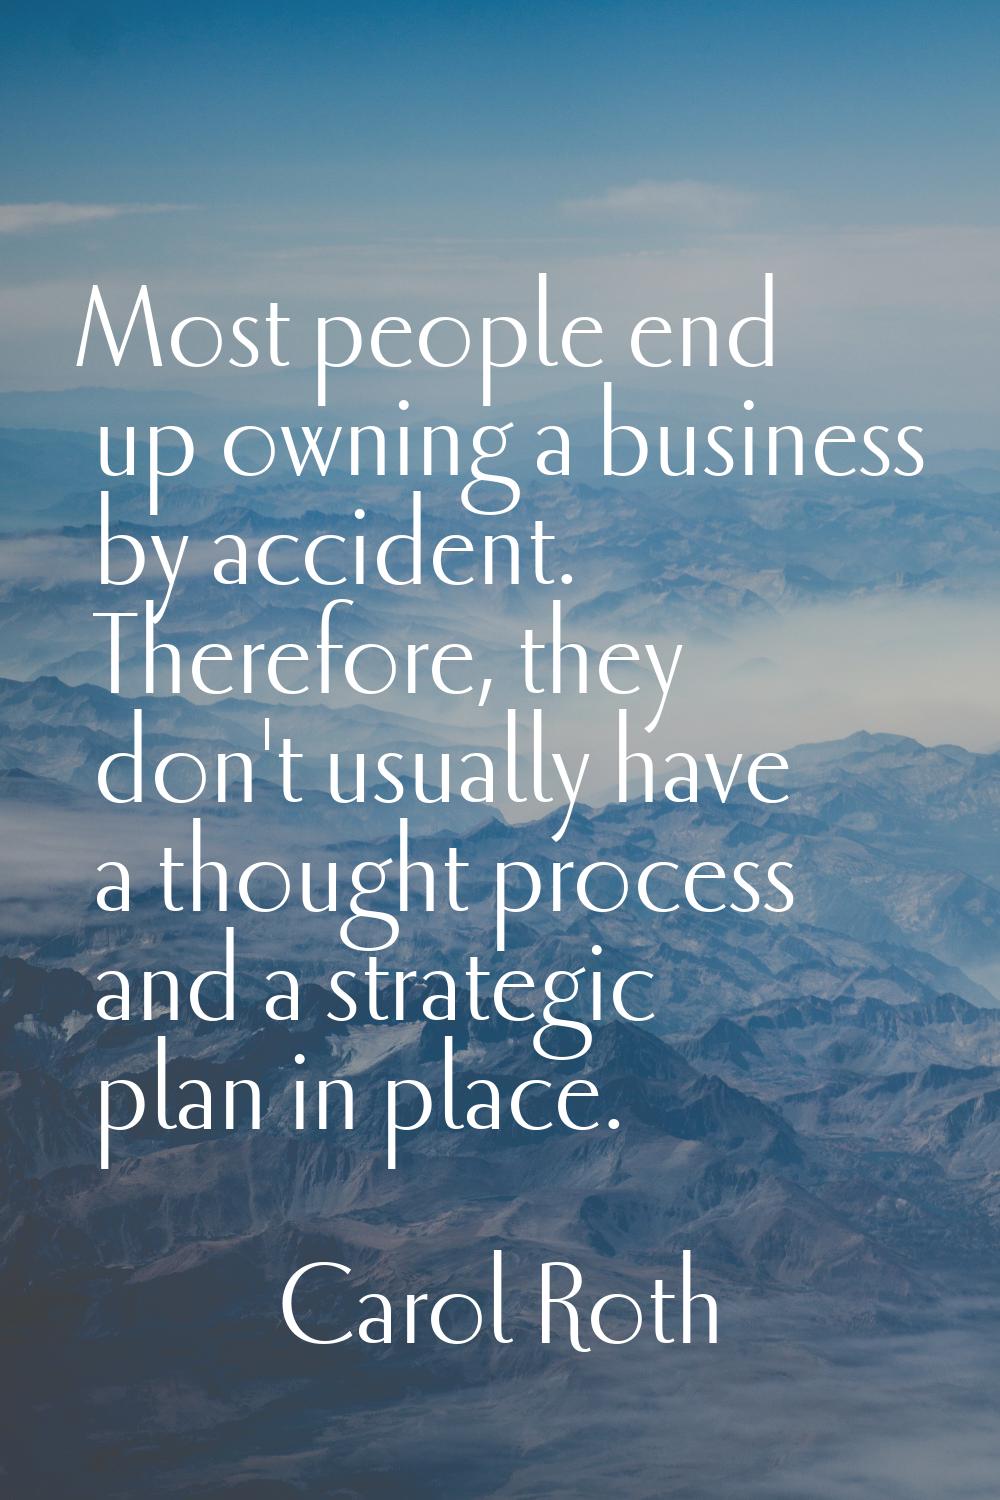 Most people end up owning a business by accident. Therefore, they don't usually have a thought proc